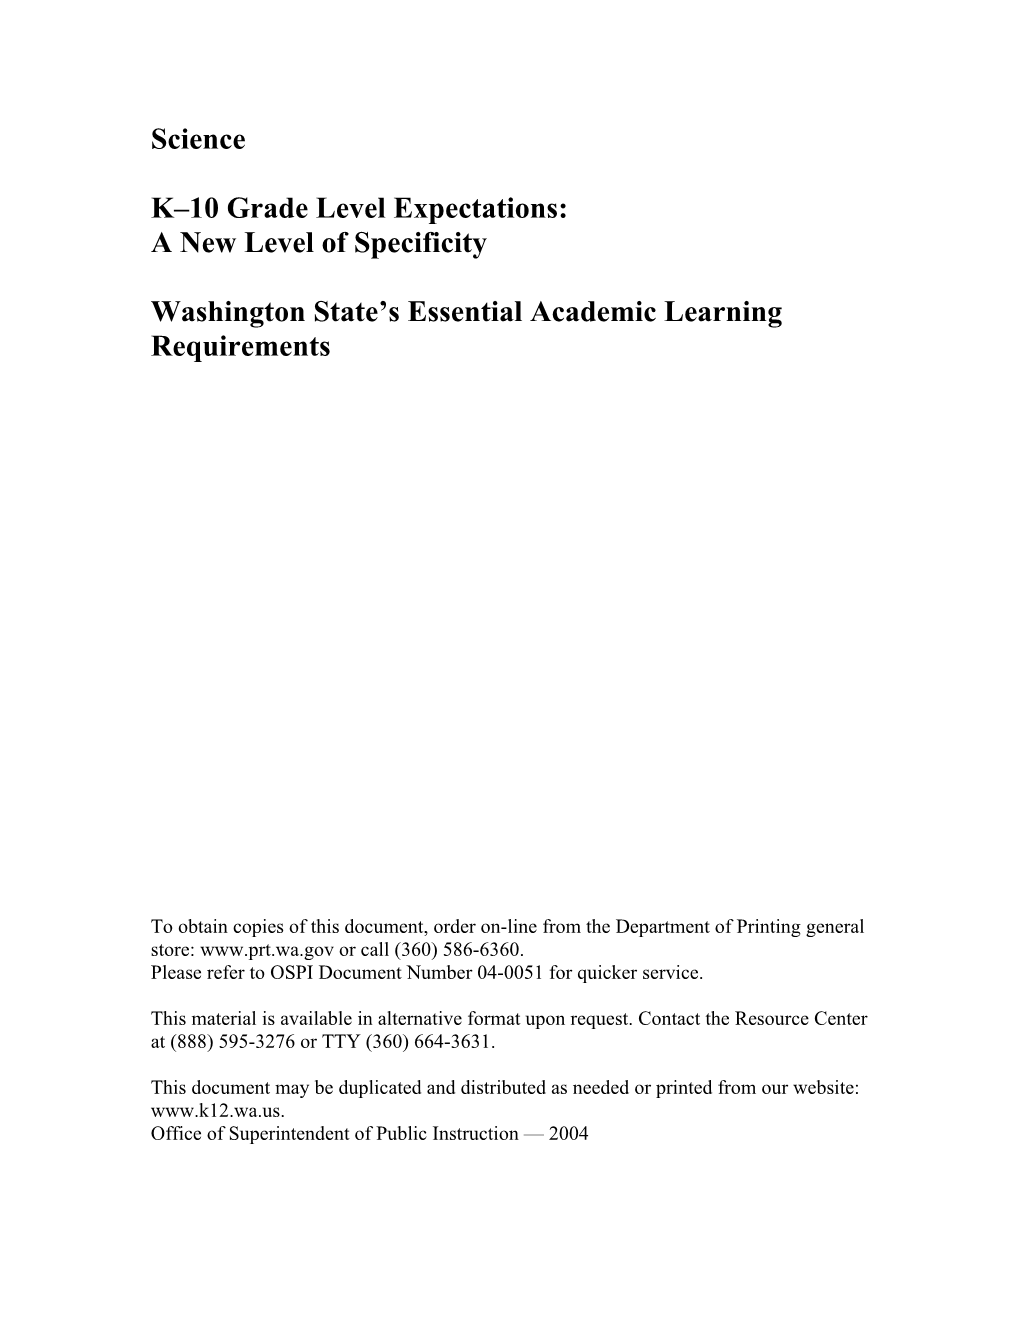 K 10 Grade Level Expectations: a New Level of Specificity